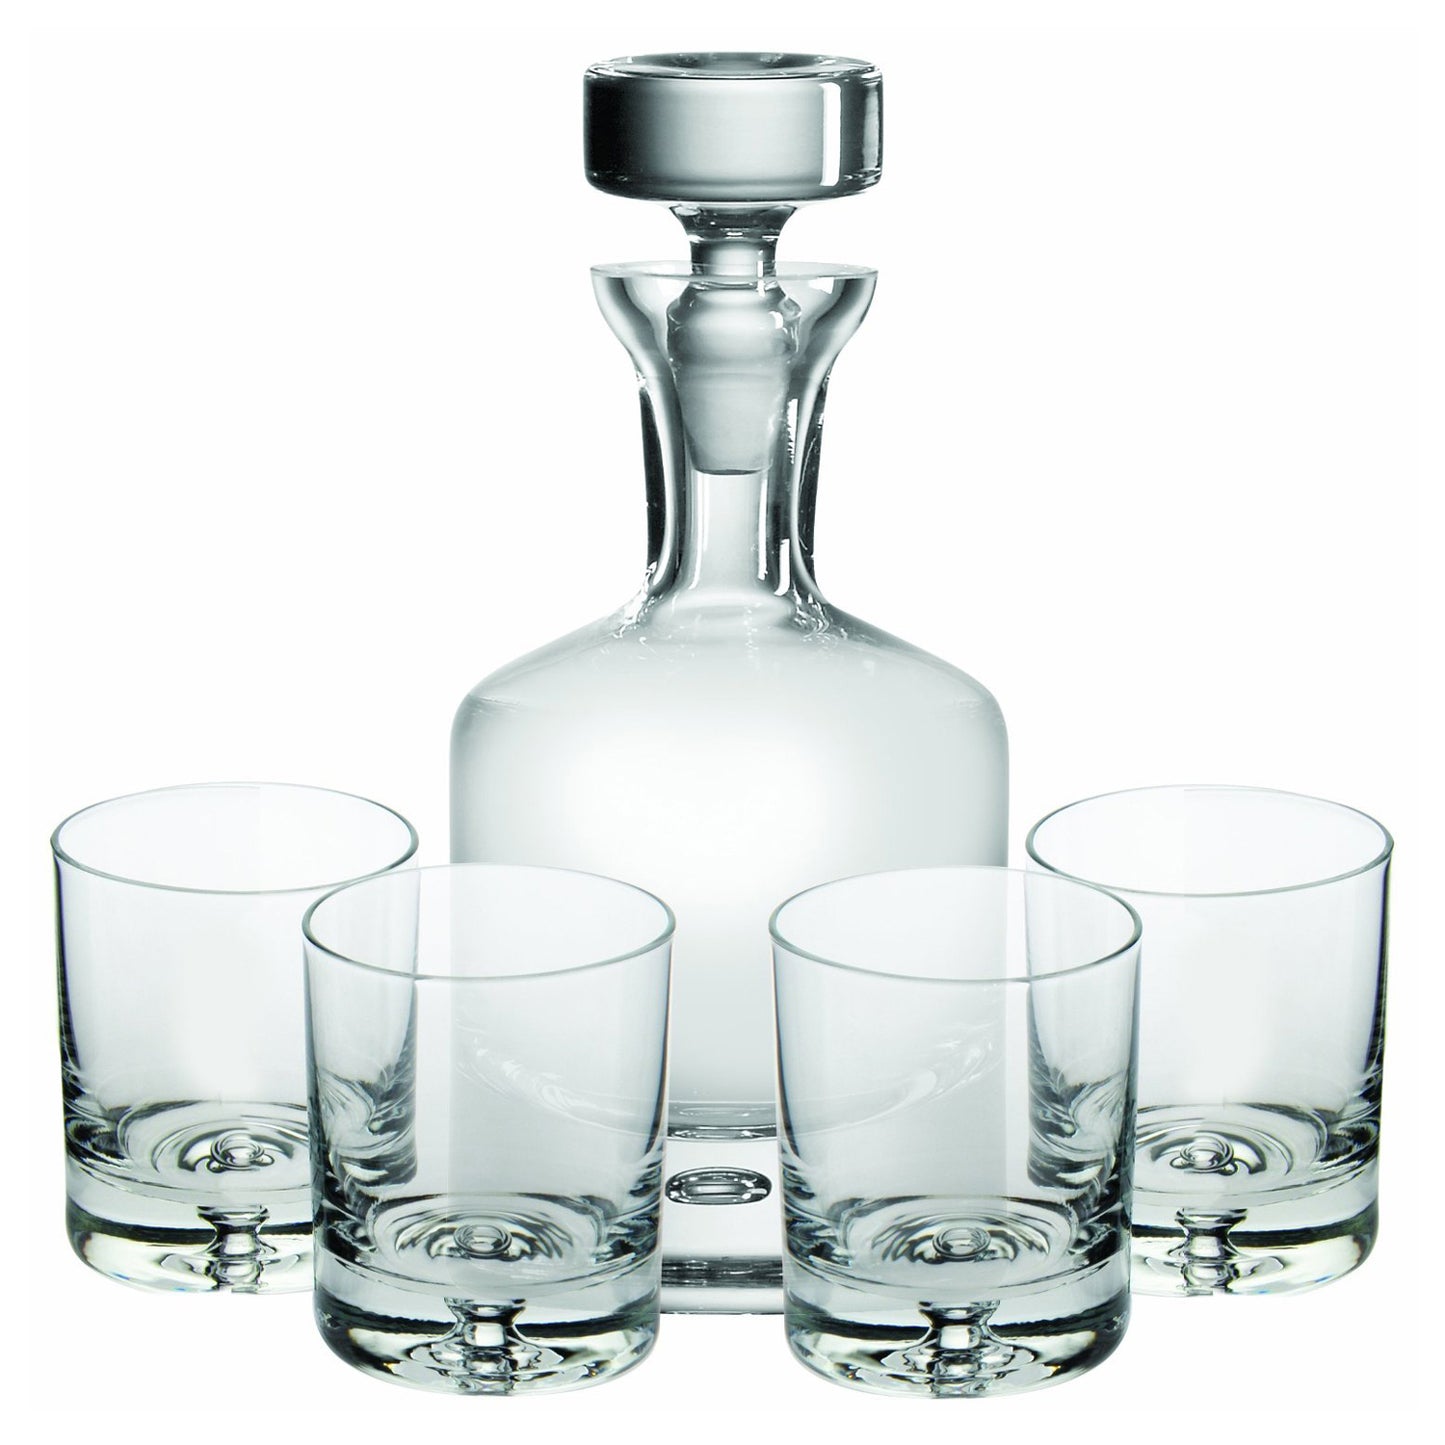 Ravenscroft Crystal Taylor Double Old Fashioned Decanter Gift Set